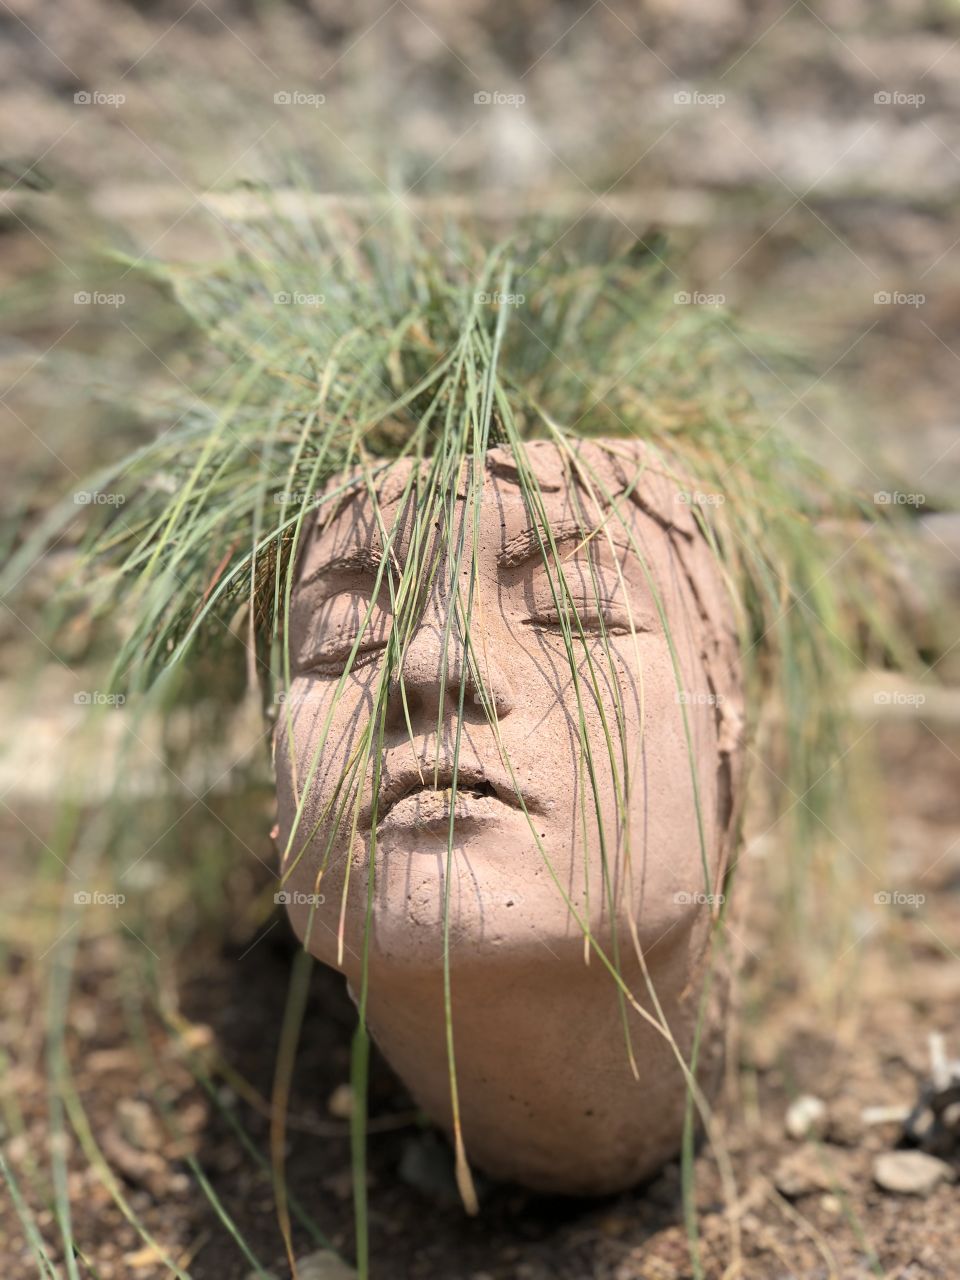 Plant that looks like hair growing out or a ceramic container with a face. 